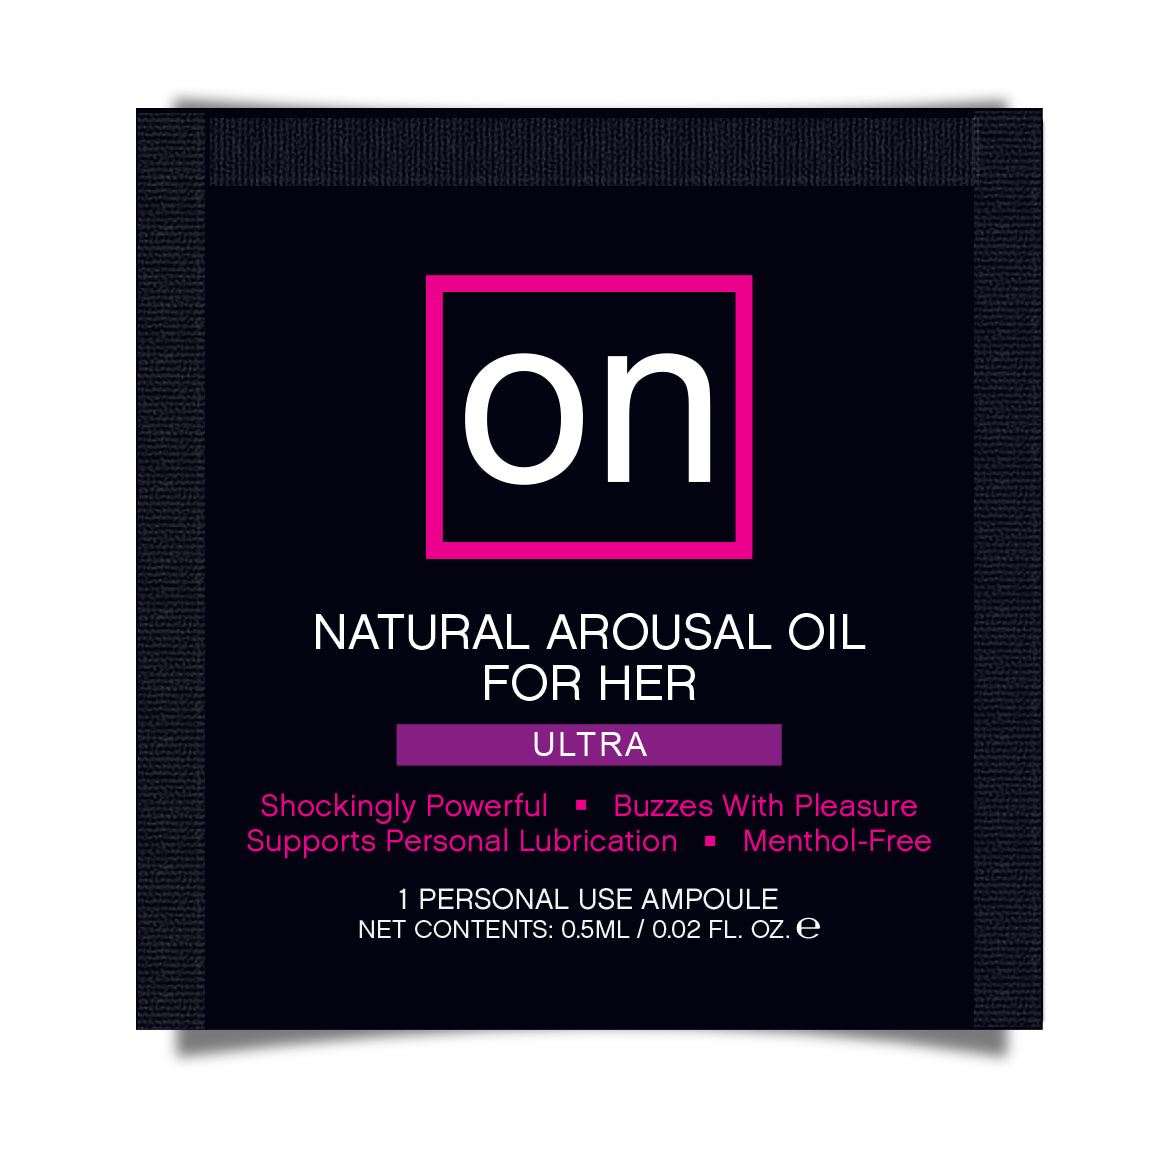 On for Her Arousal Oil Ultra Single Use Ampoule